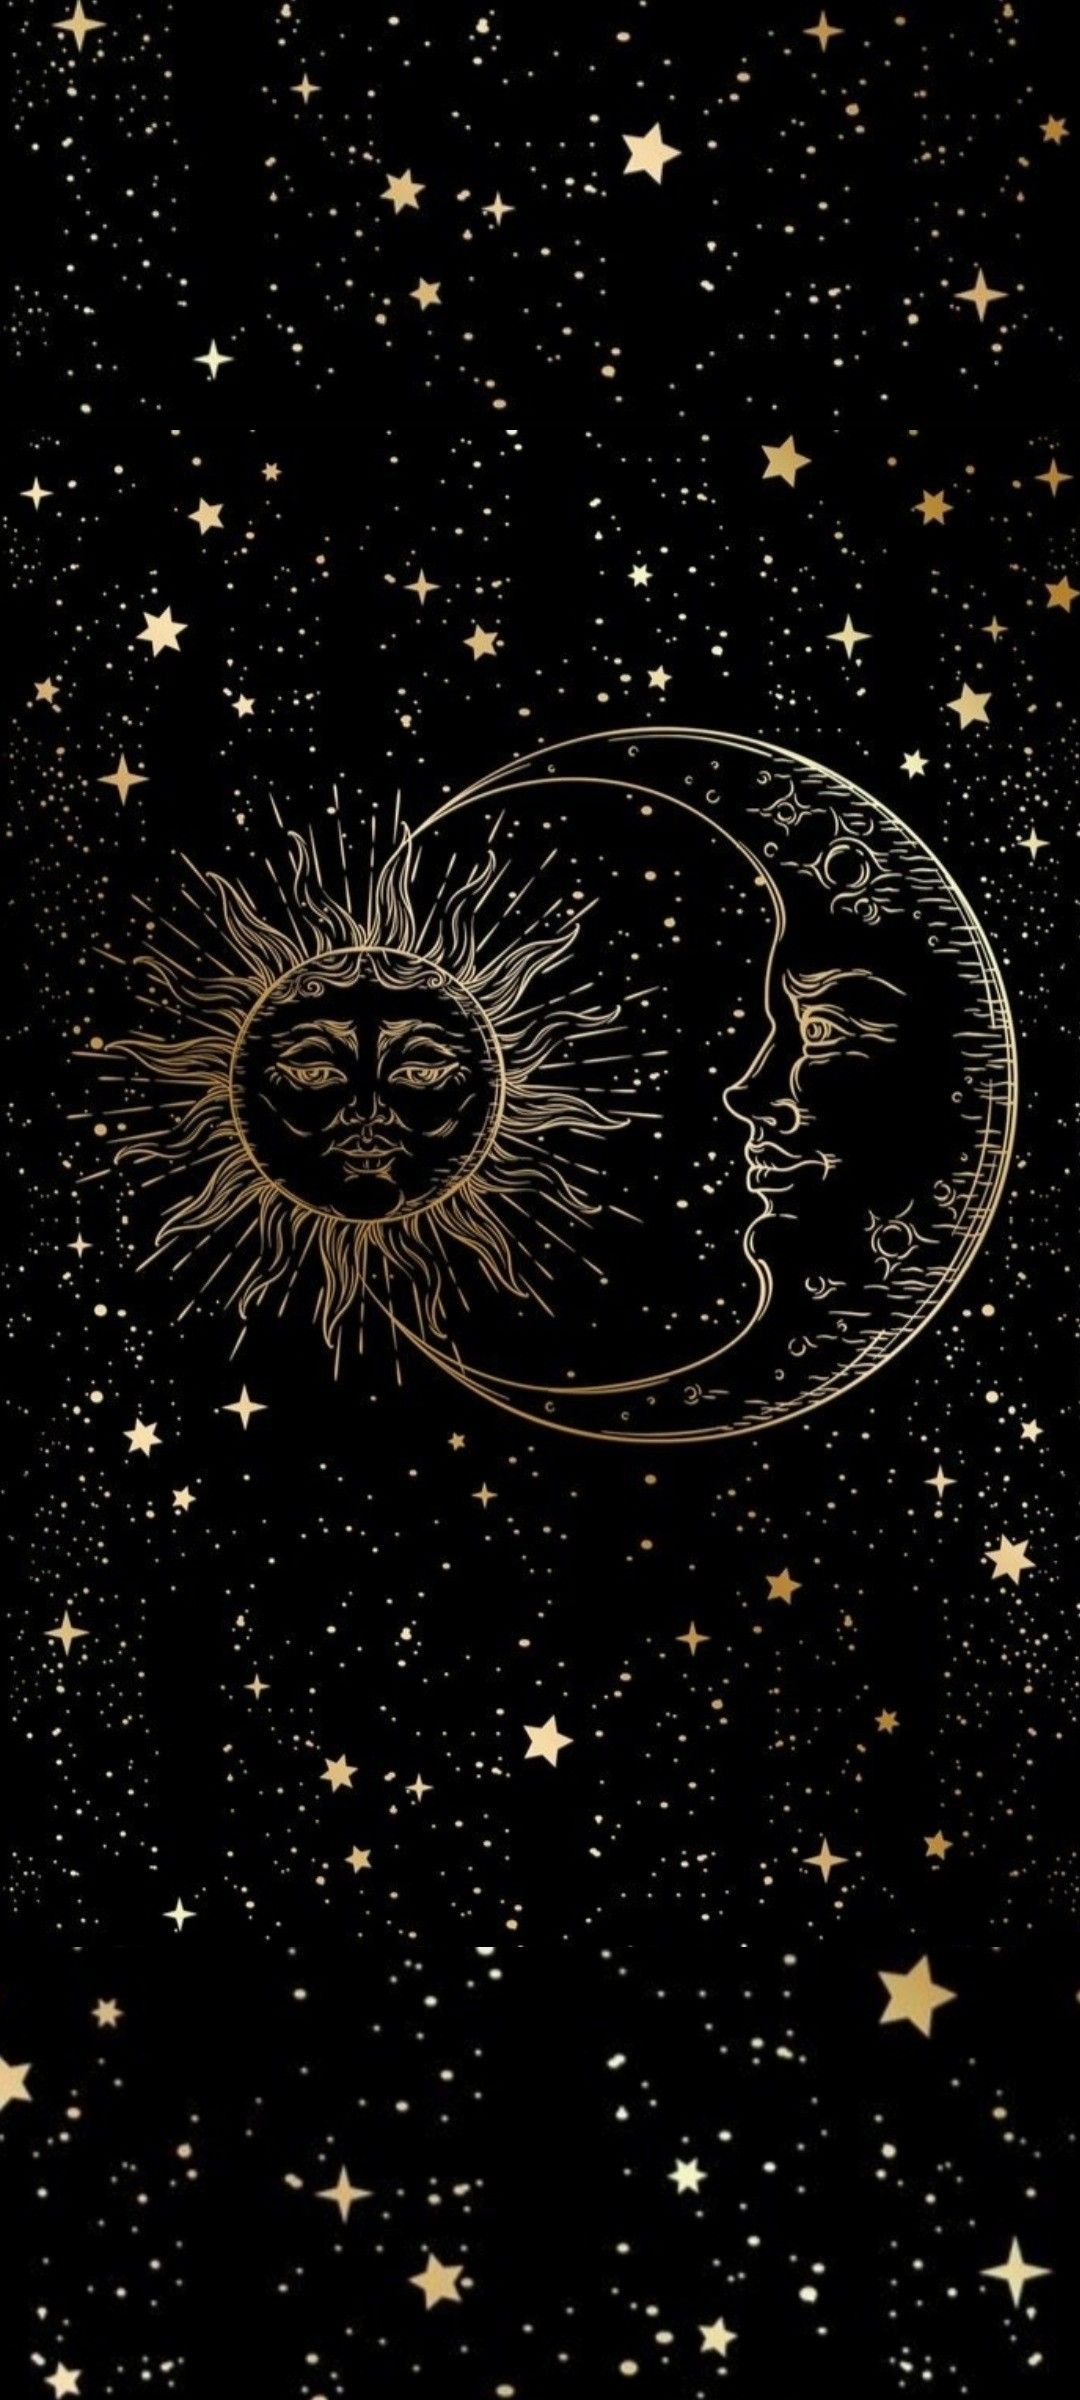 The sun and moon in gold on a black background - Moon, sun, sunlight, 1080x2400